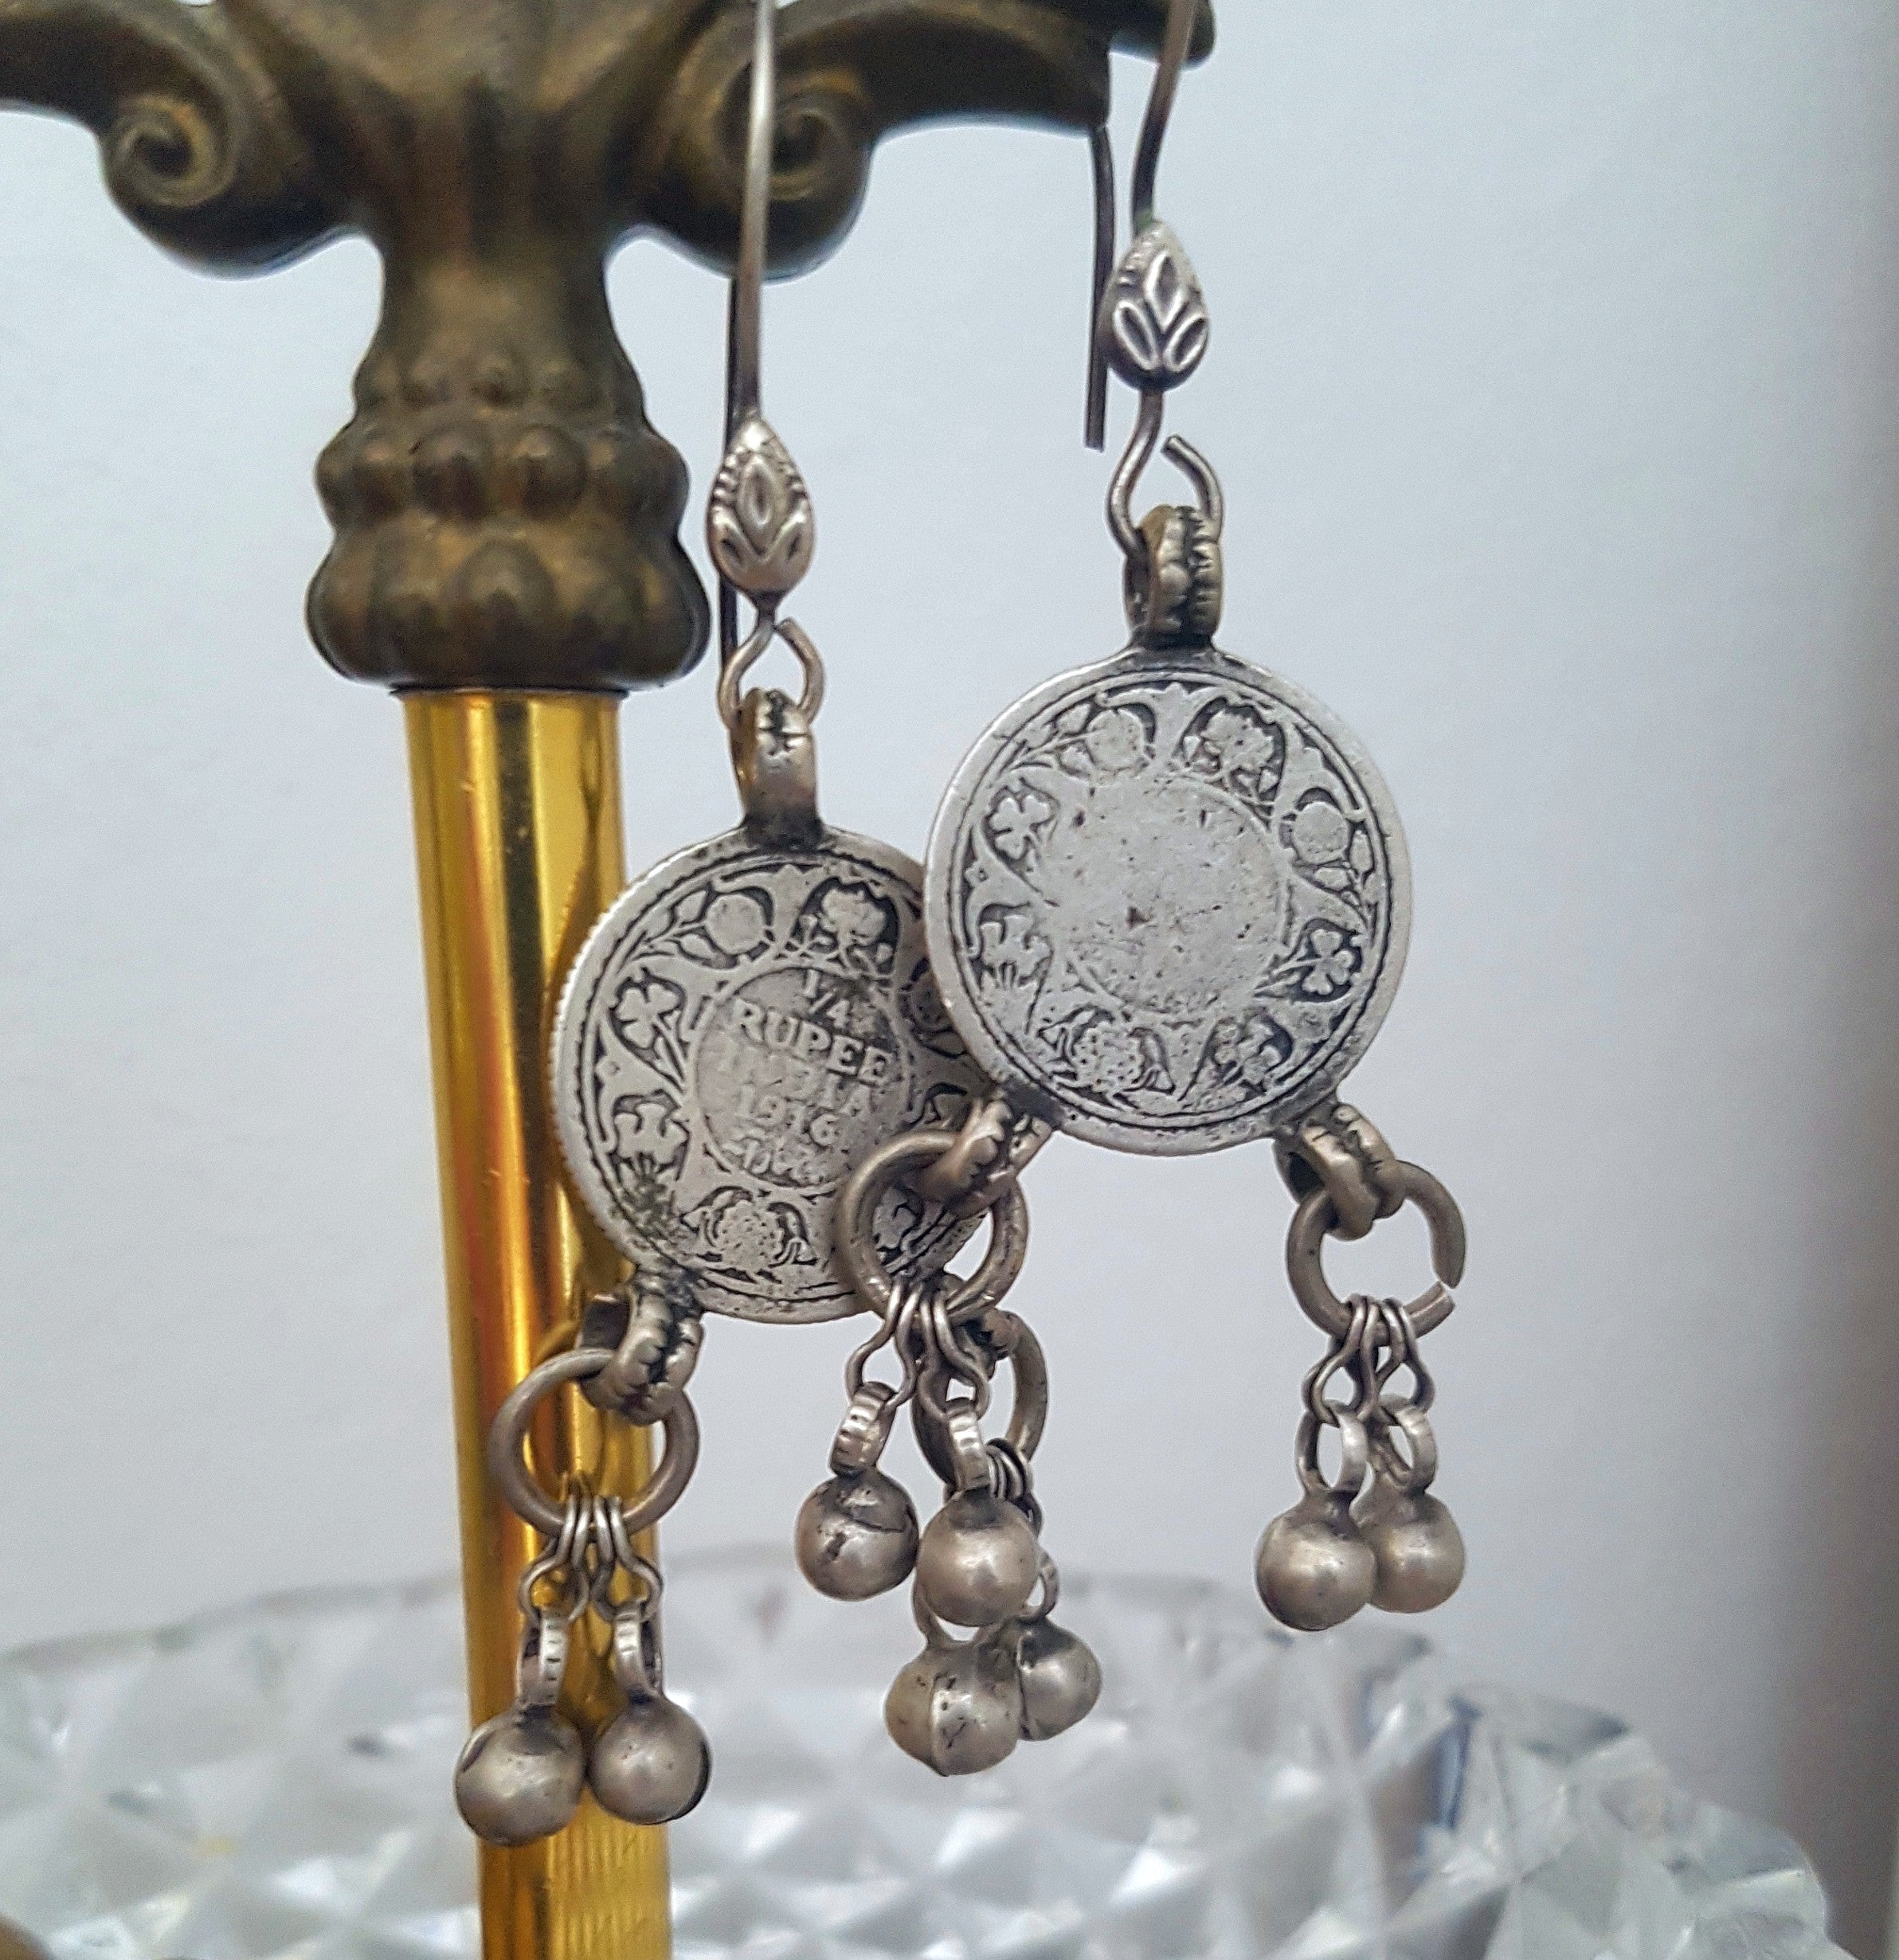 Reserved E. -Indian Coin Dangle Earrings with Bells